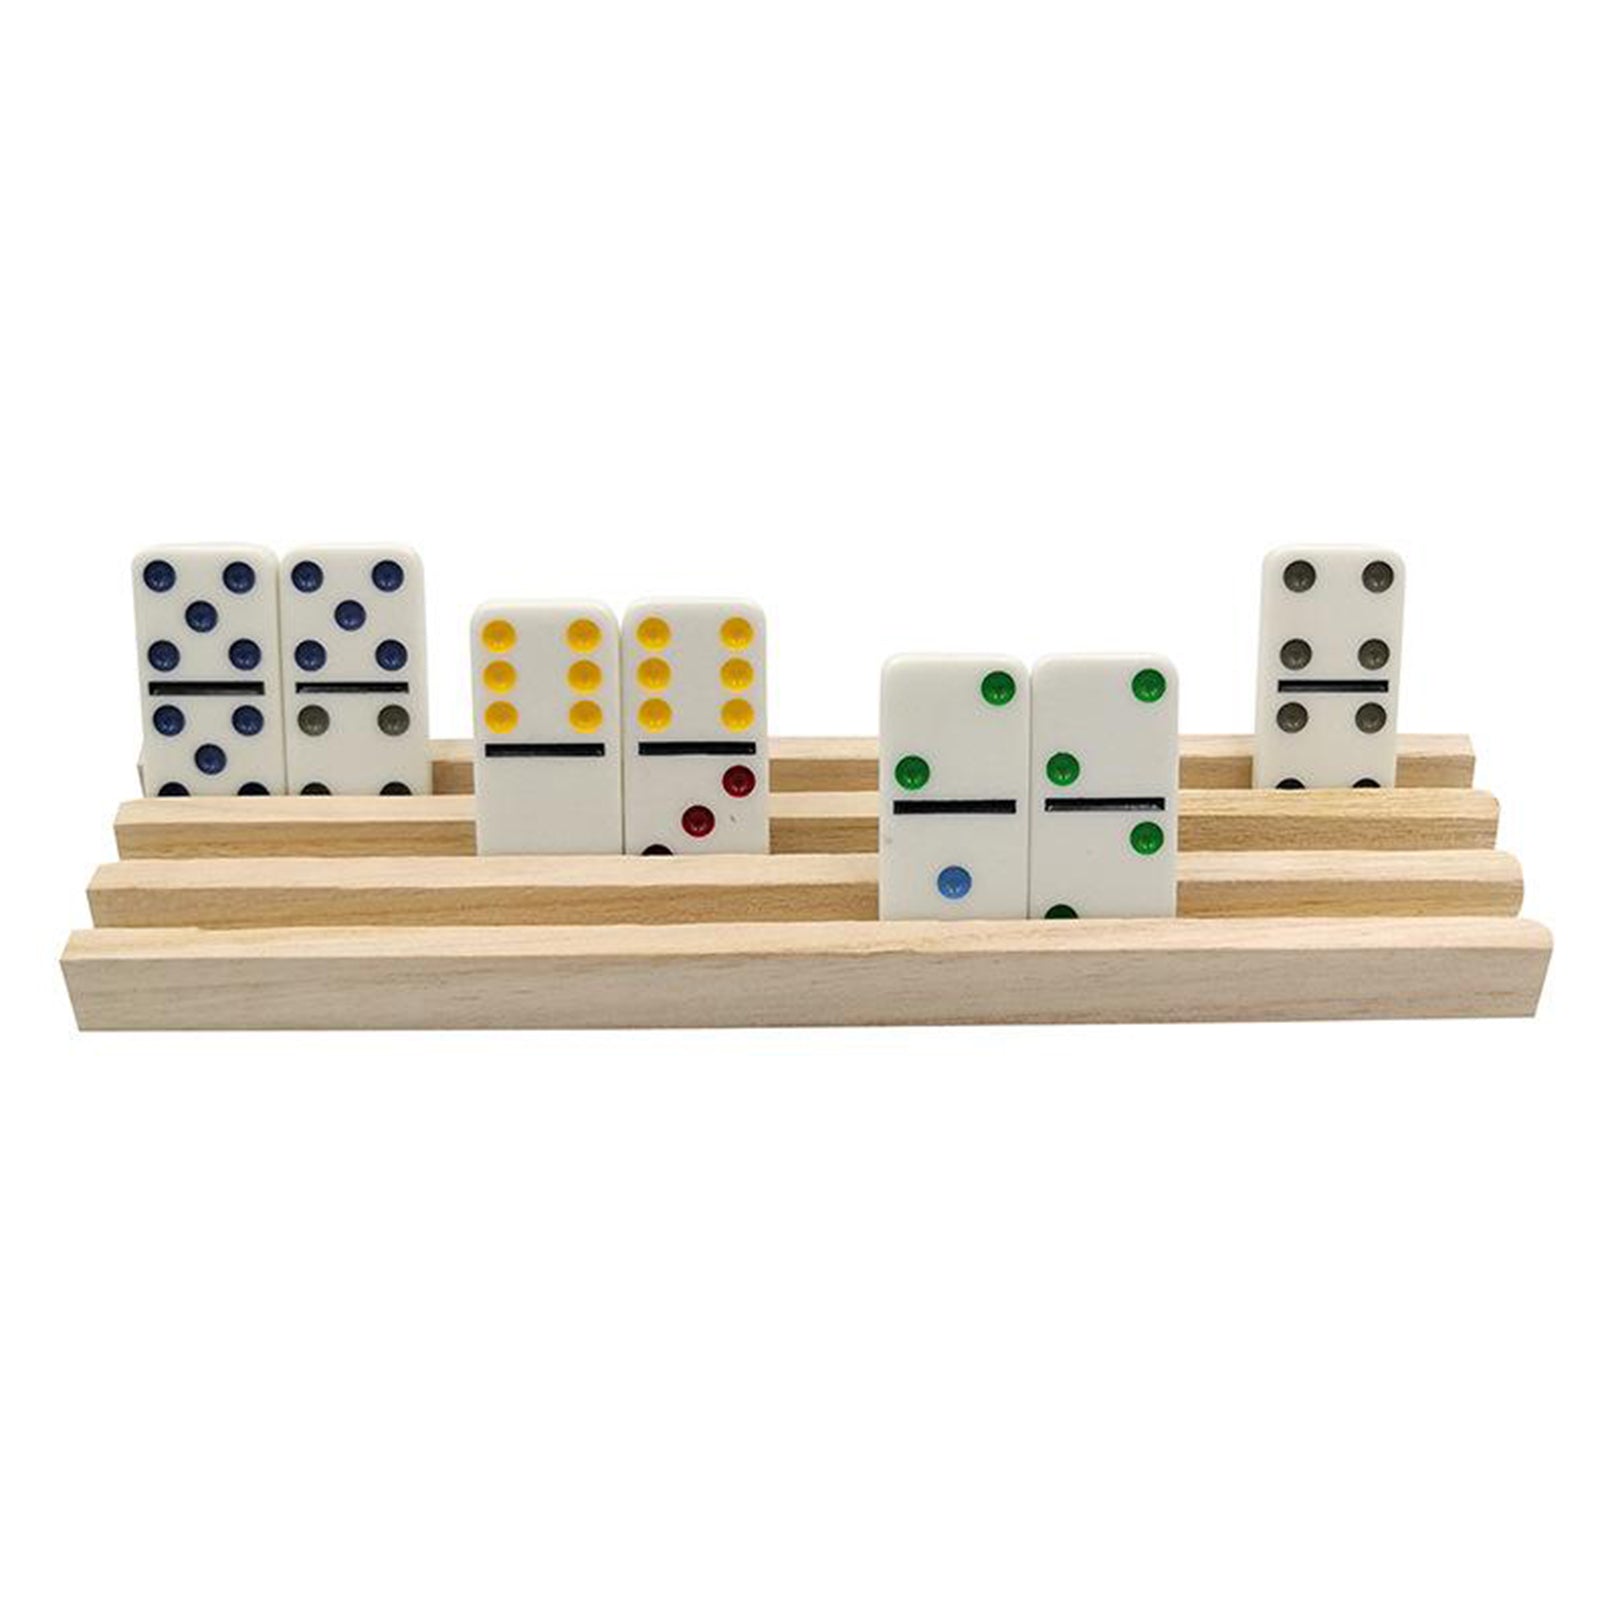 Unfinished Wooden Domino Trays Racks Stand Organizer for Domino Tiles Game